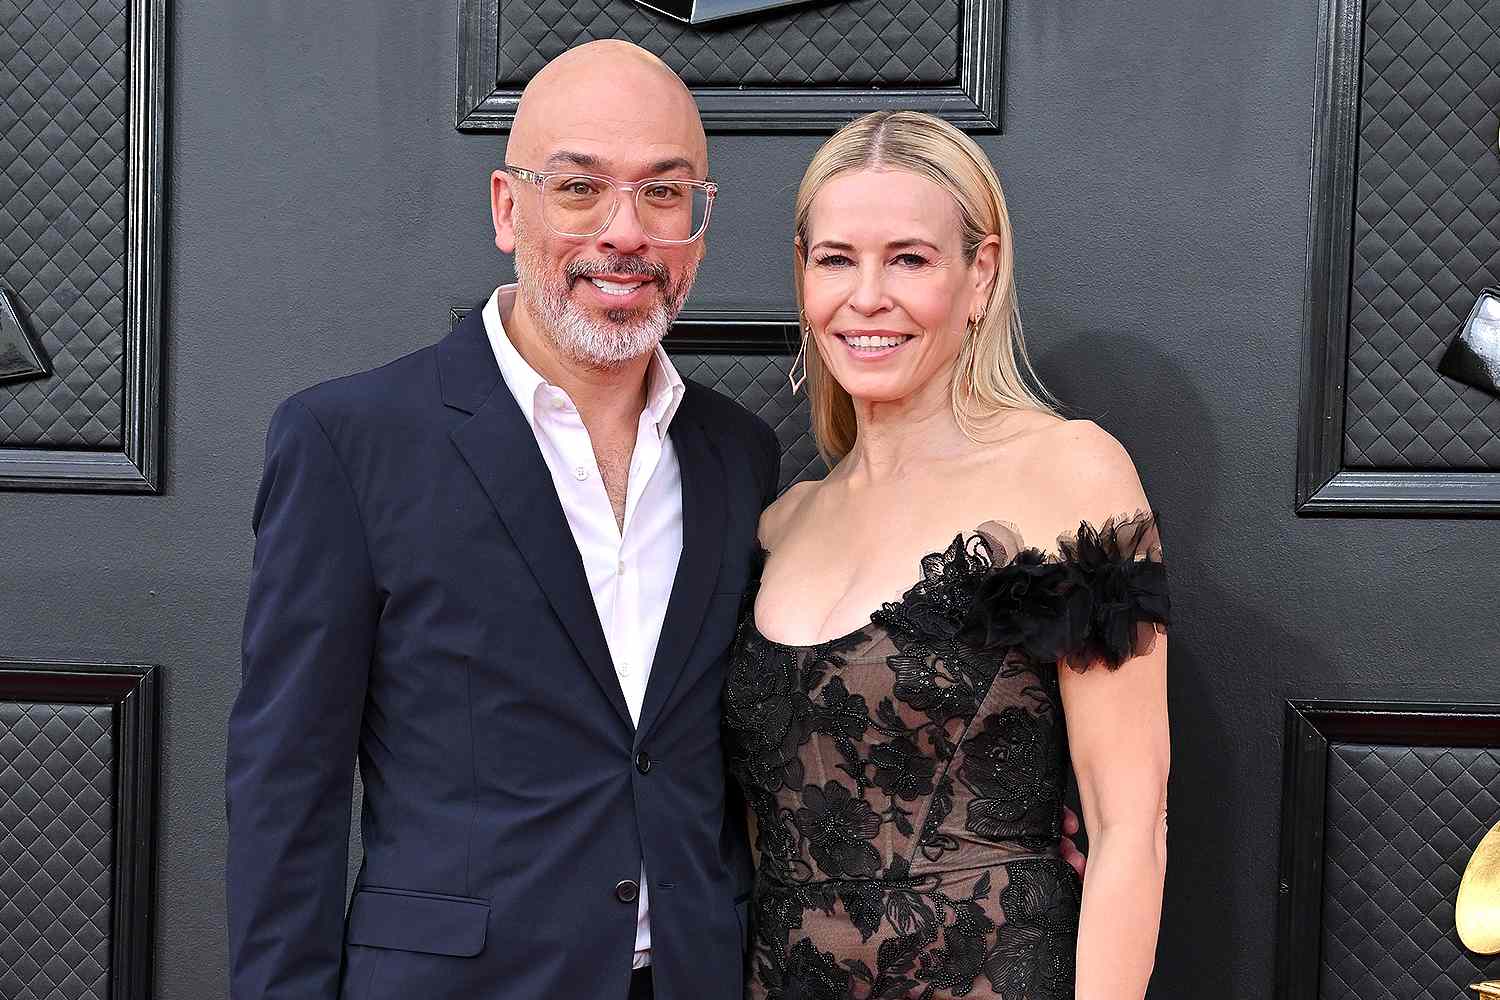 Chelsea Handler and Jo Koy at the 2022 Grammys